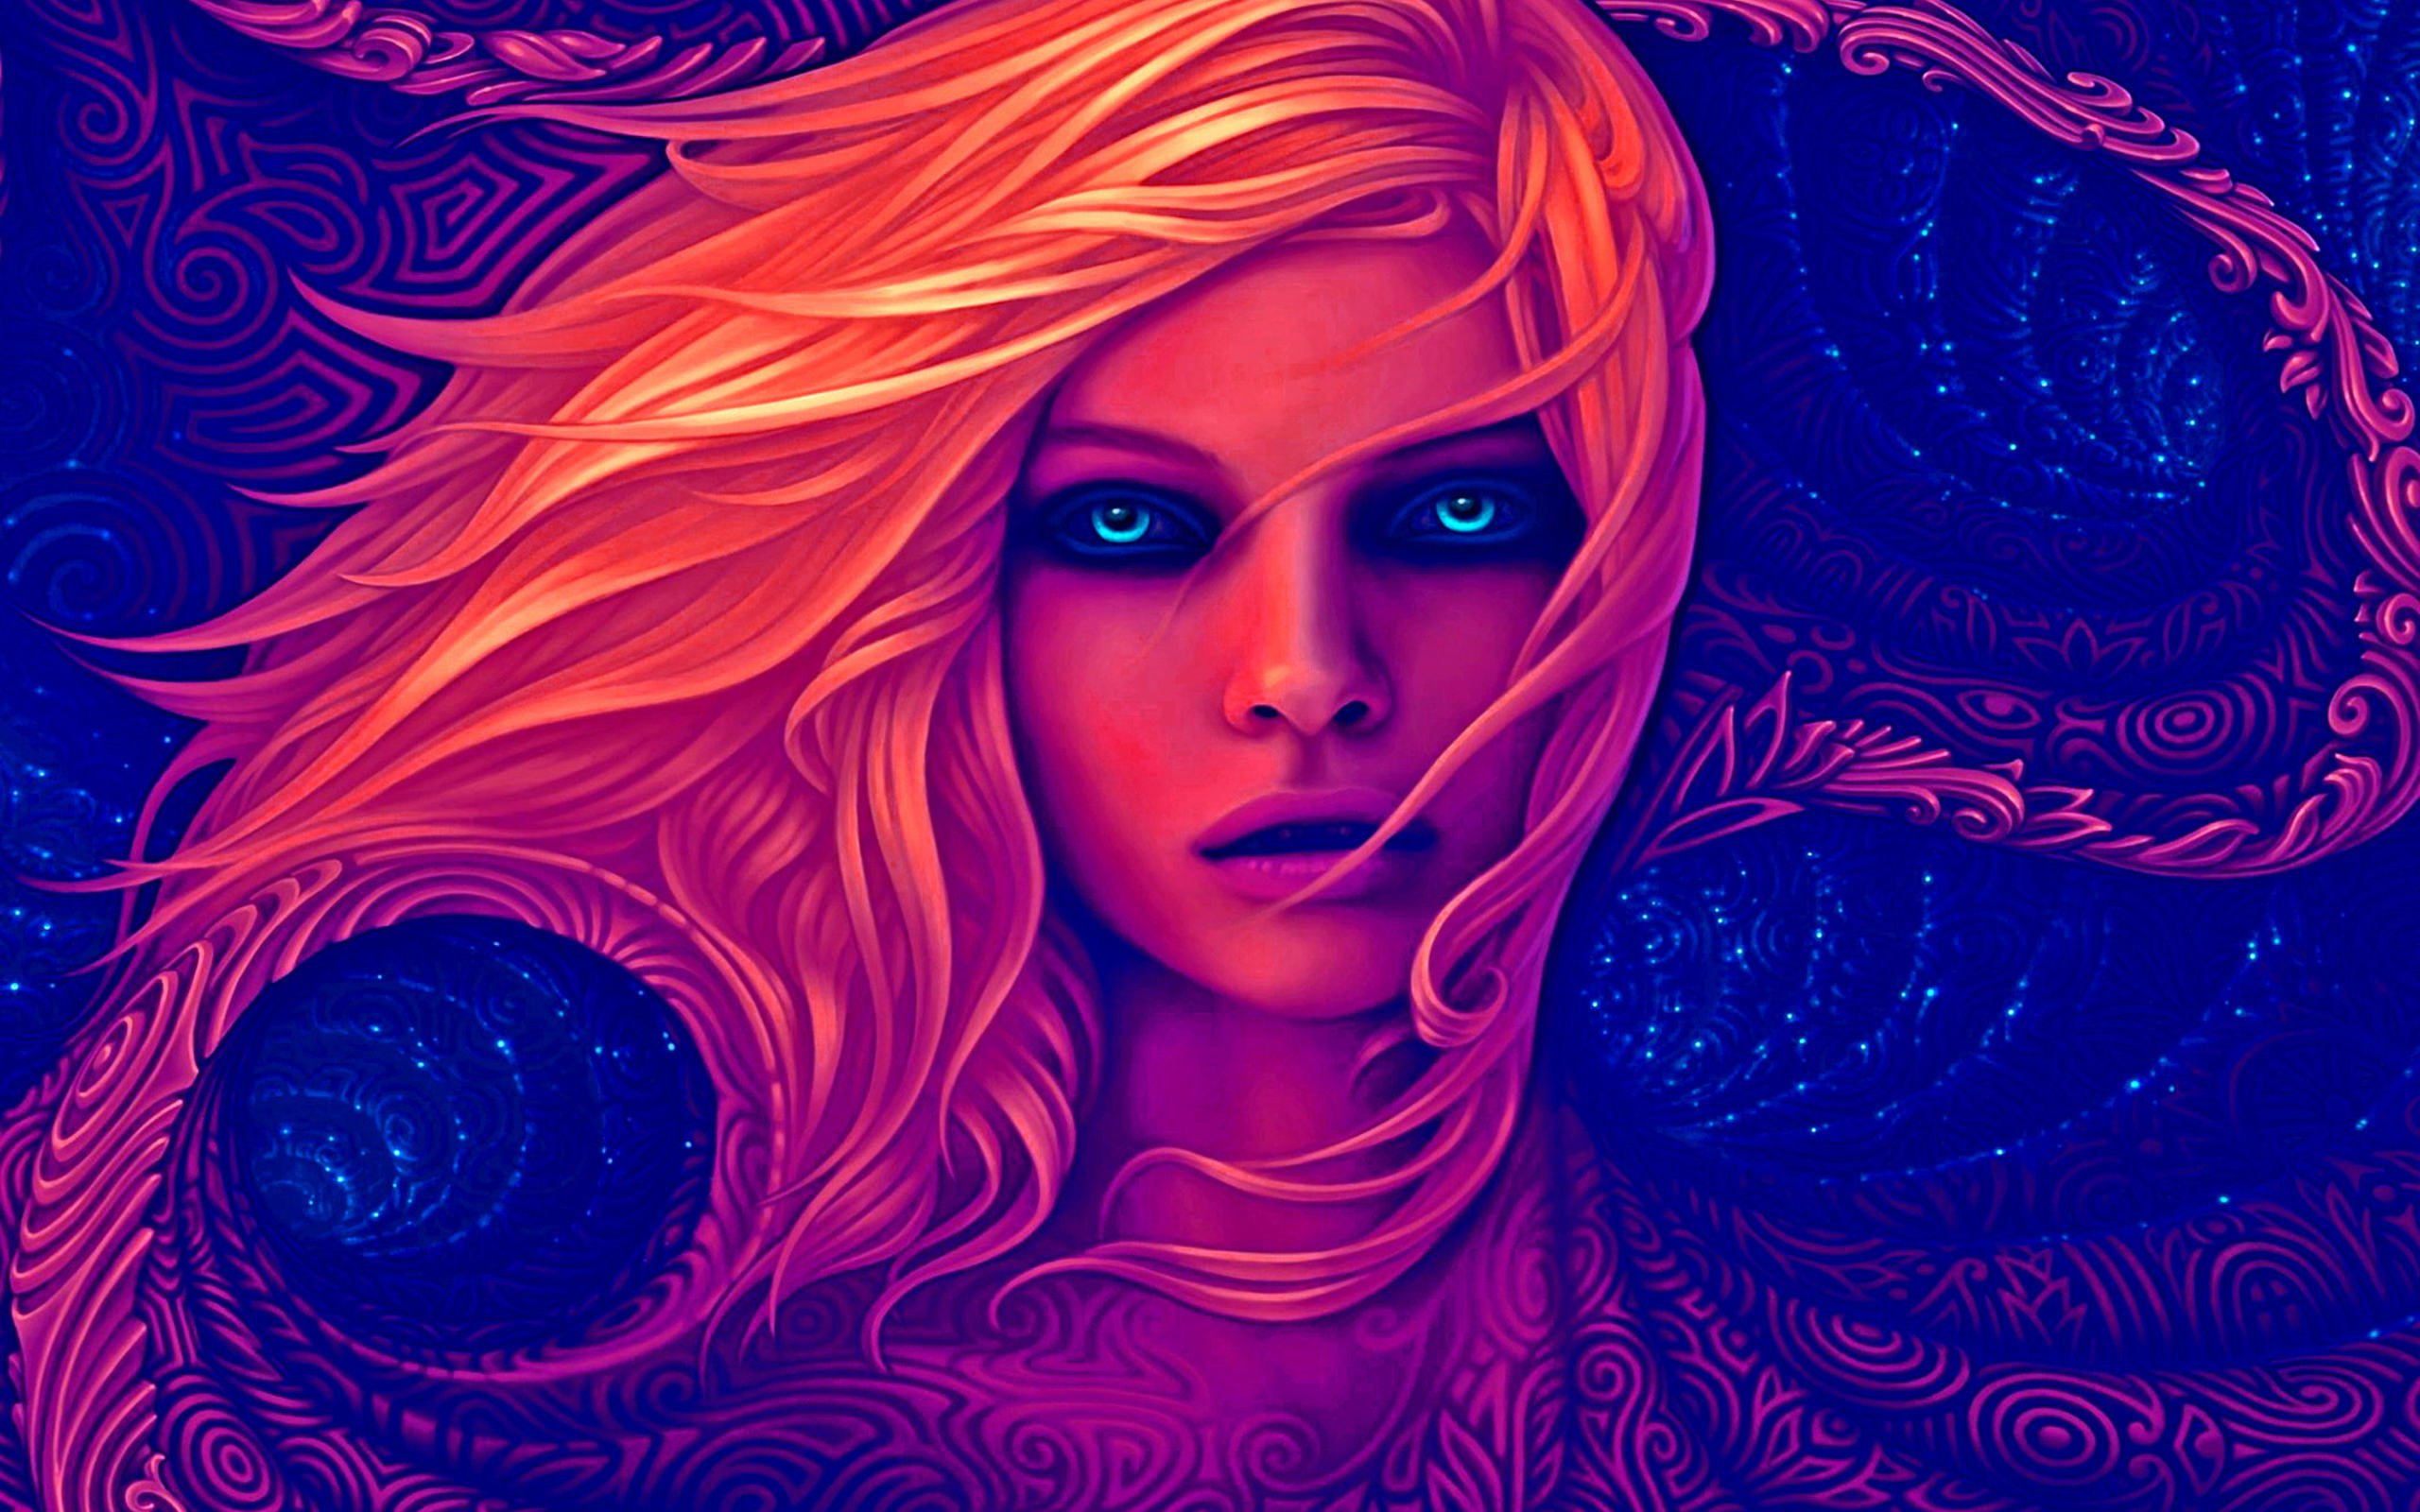 Download Wallpapers Art Fantasy Woman Portrait Blue Eyes For Desktop With Resolution